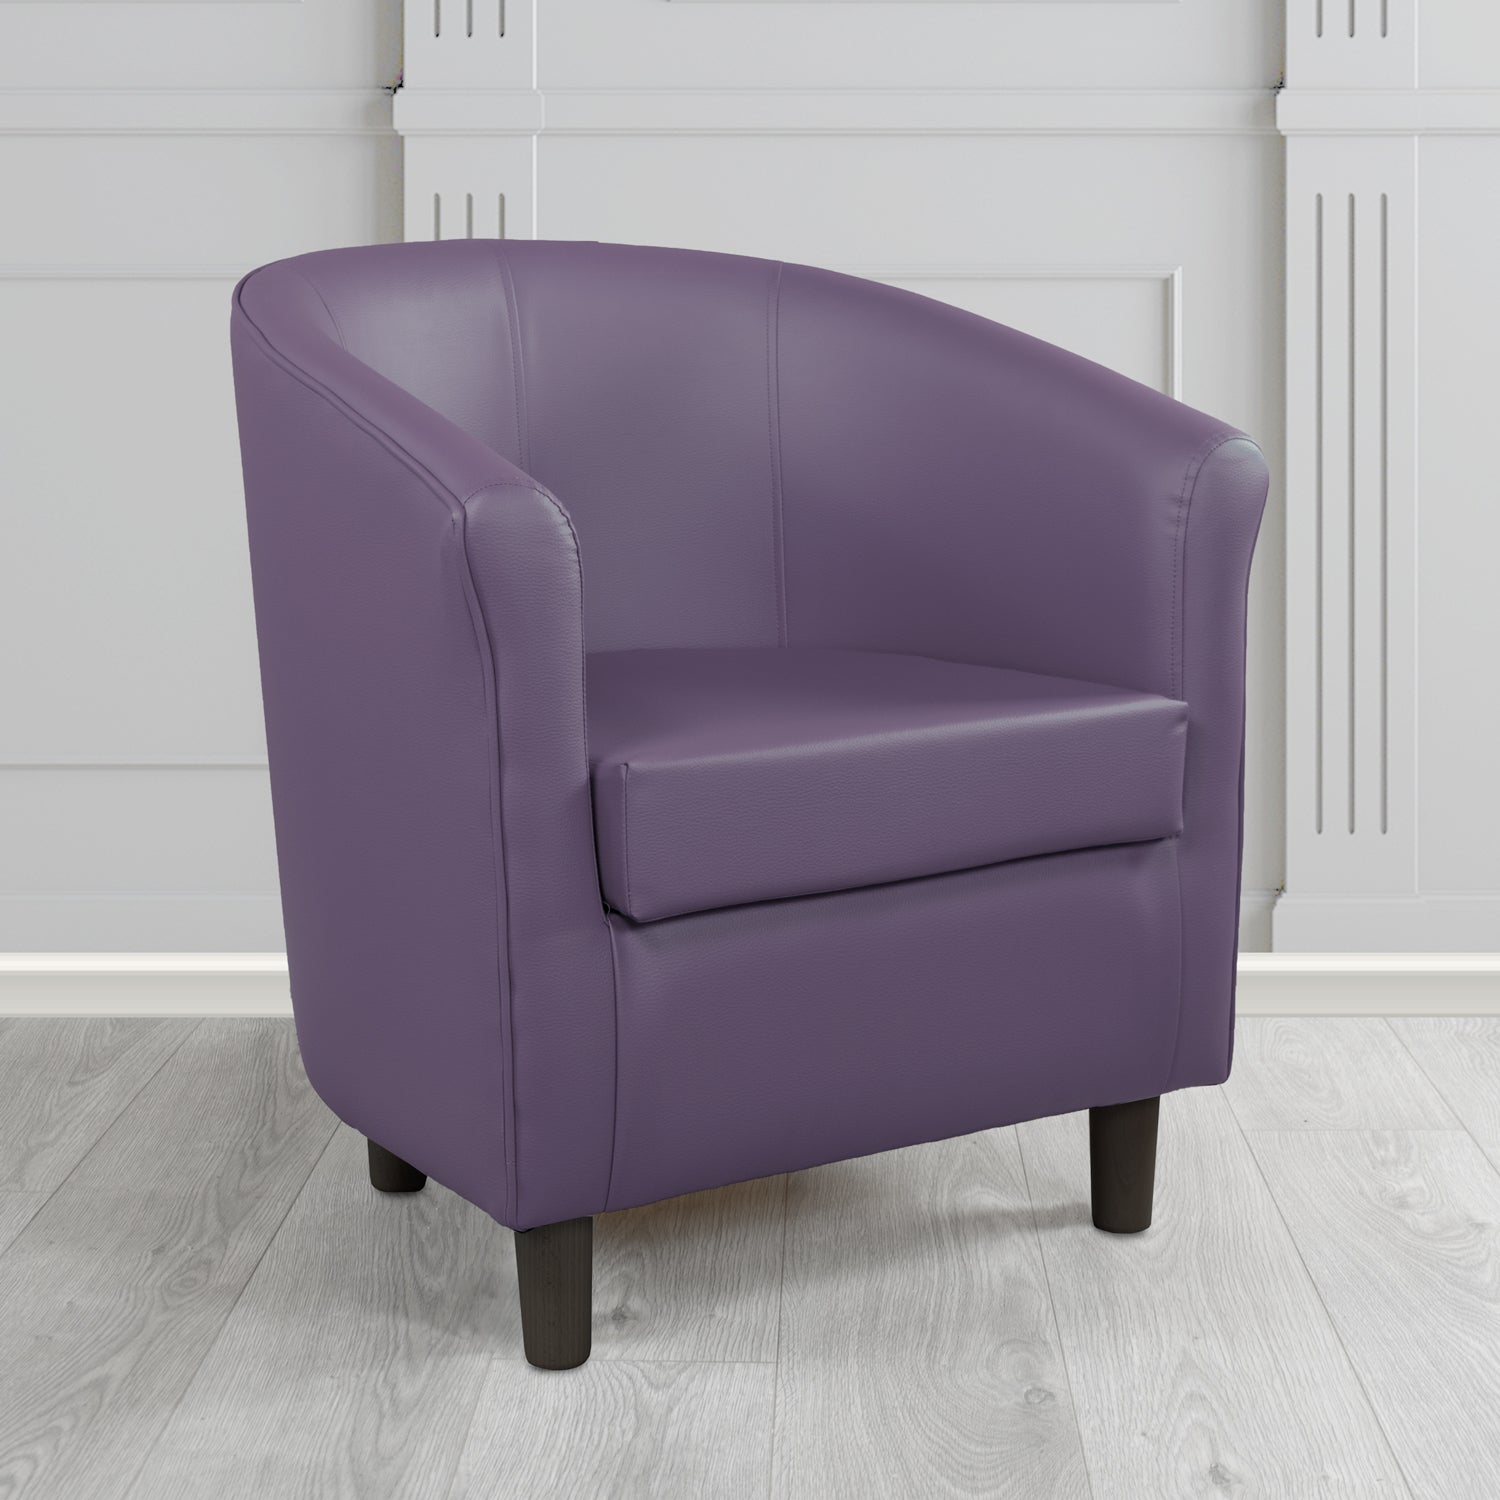 Tuscany Just Colour Professor Plum Antimicrobial Crib 5 Contract Faux Leather Tub Chair - The Tub Chair Shop